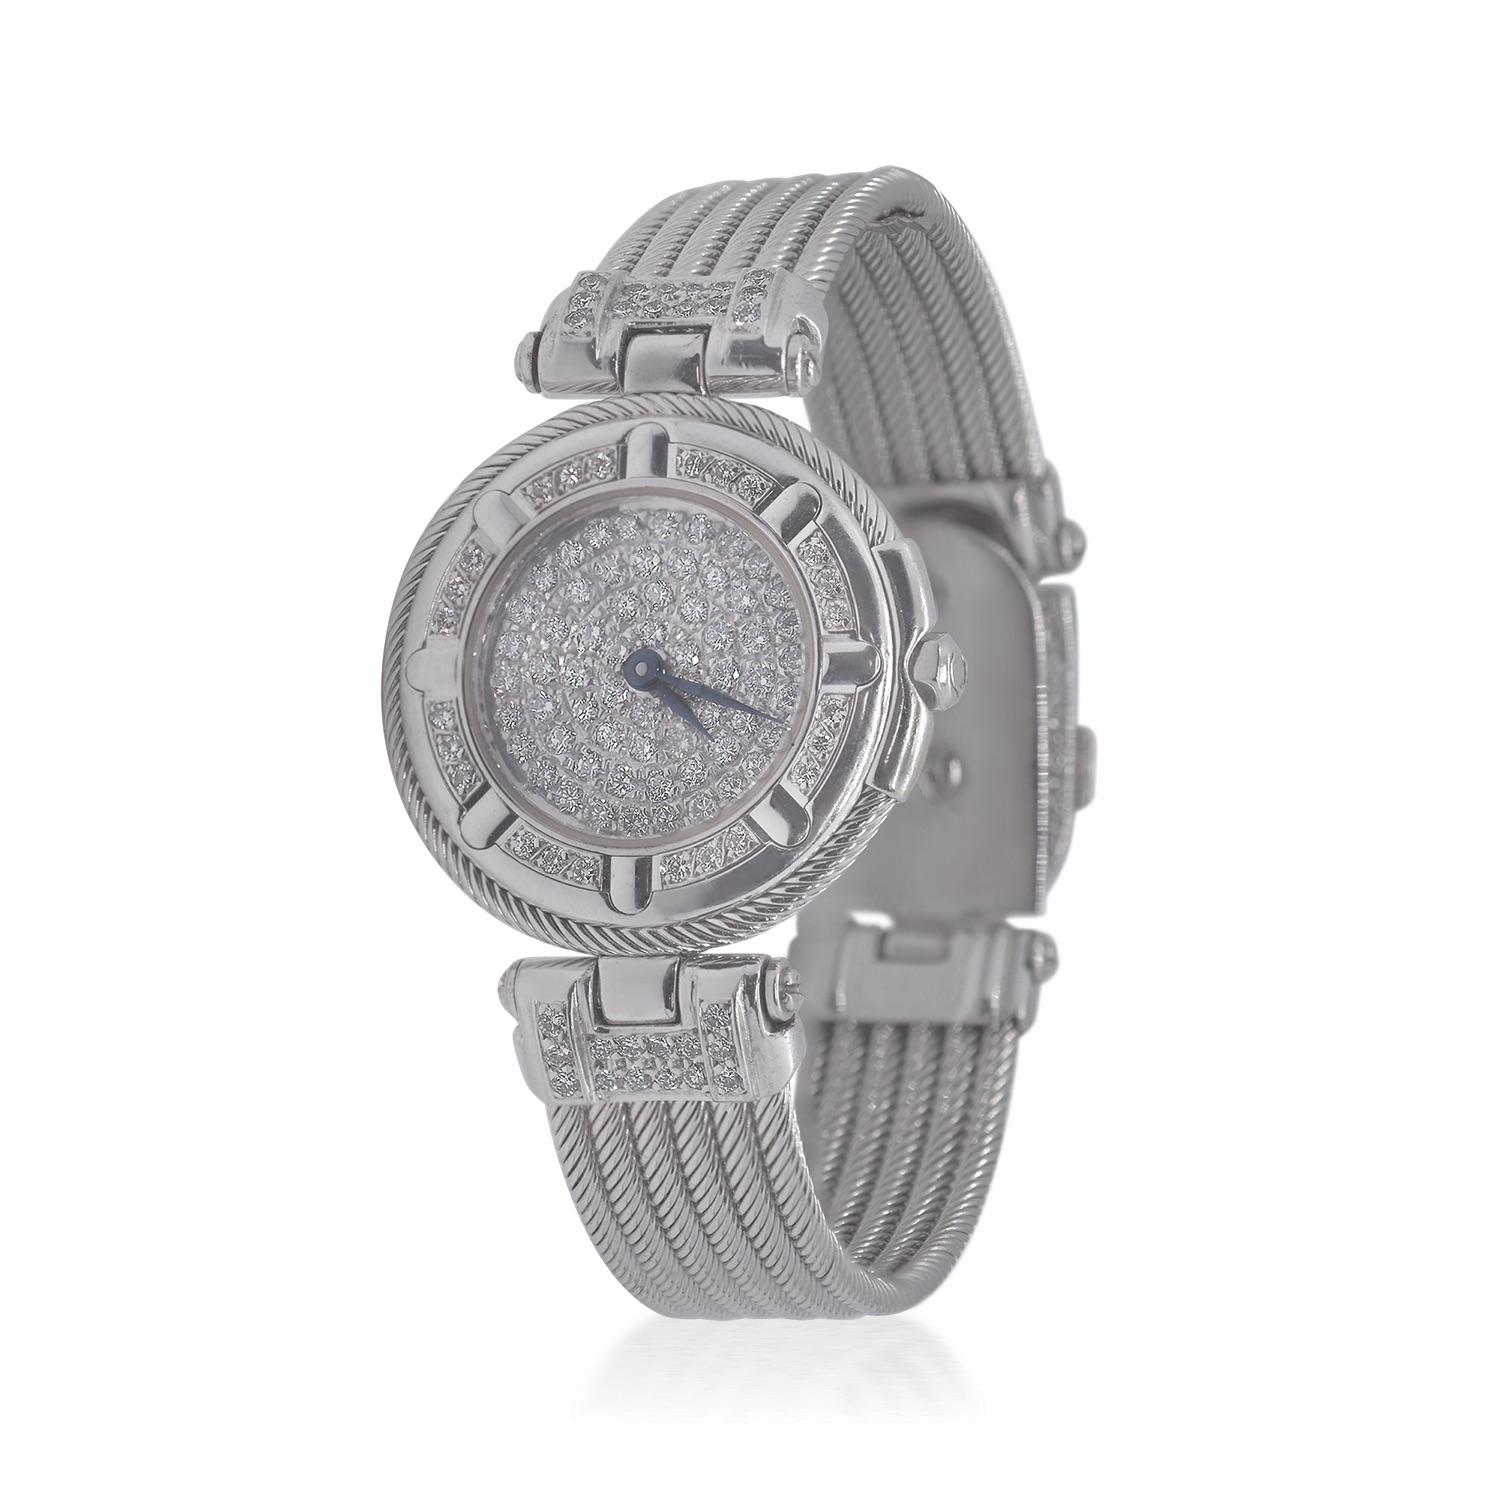 Philippe Charriol 18K White Gold and Diamond Watch  (70.1 total grams) with diamond bezel and diamond dial (62 diamonds 1.40mm and 52 diamonds, 1.25mm each)  1.45ct total weight. 